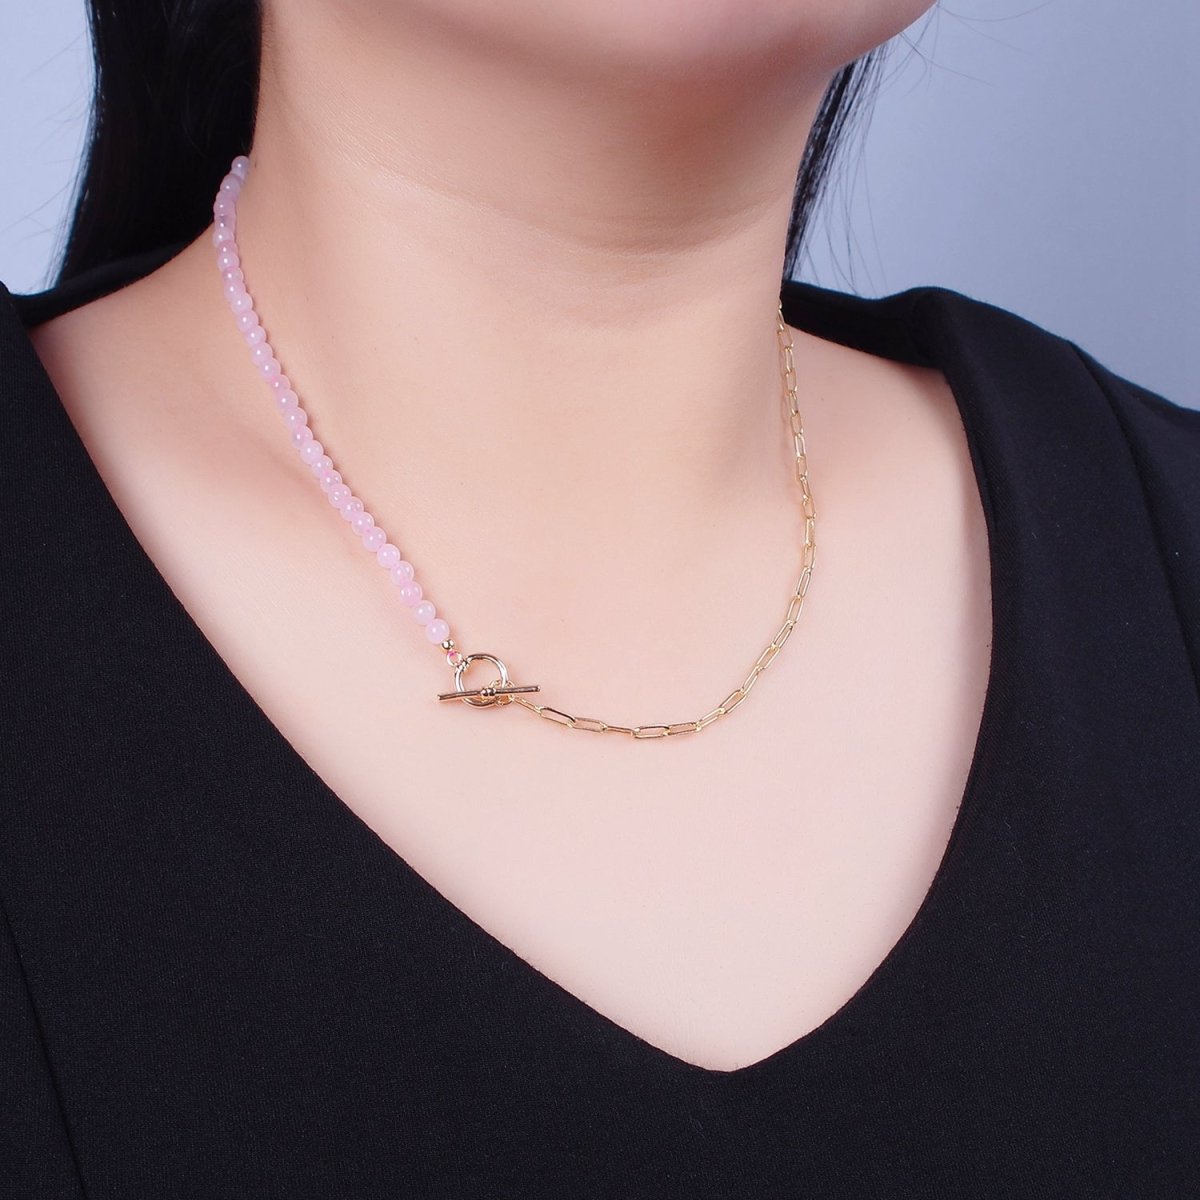 Dainty Half Bead Half Link Chain Necklace, 24k Gold Filled Paperclip Chain with Pink Quartz Necklace | WA-968 Clearance Pricing - DLUXCA